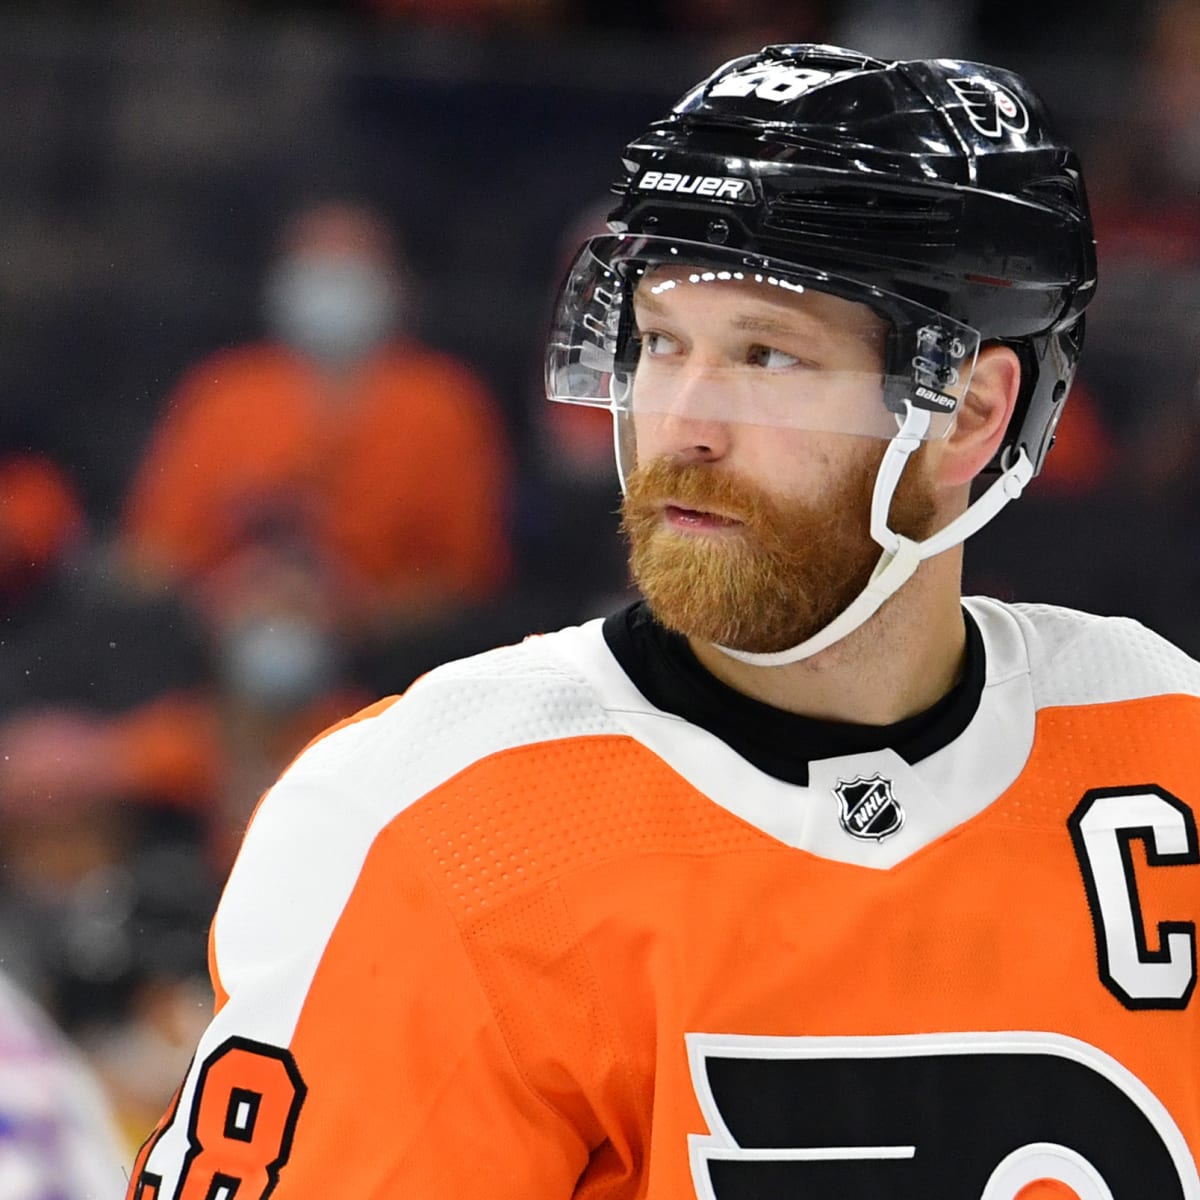 Flyers Face Claude Giroux, Ottawa; Trying to Start the Season at 2